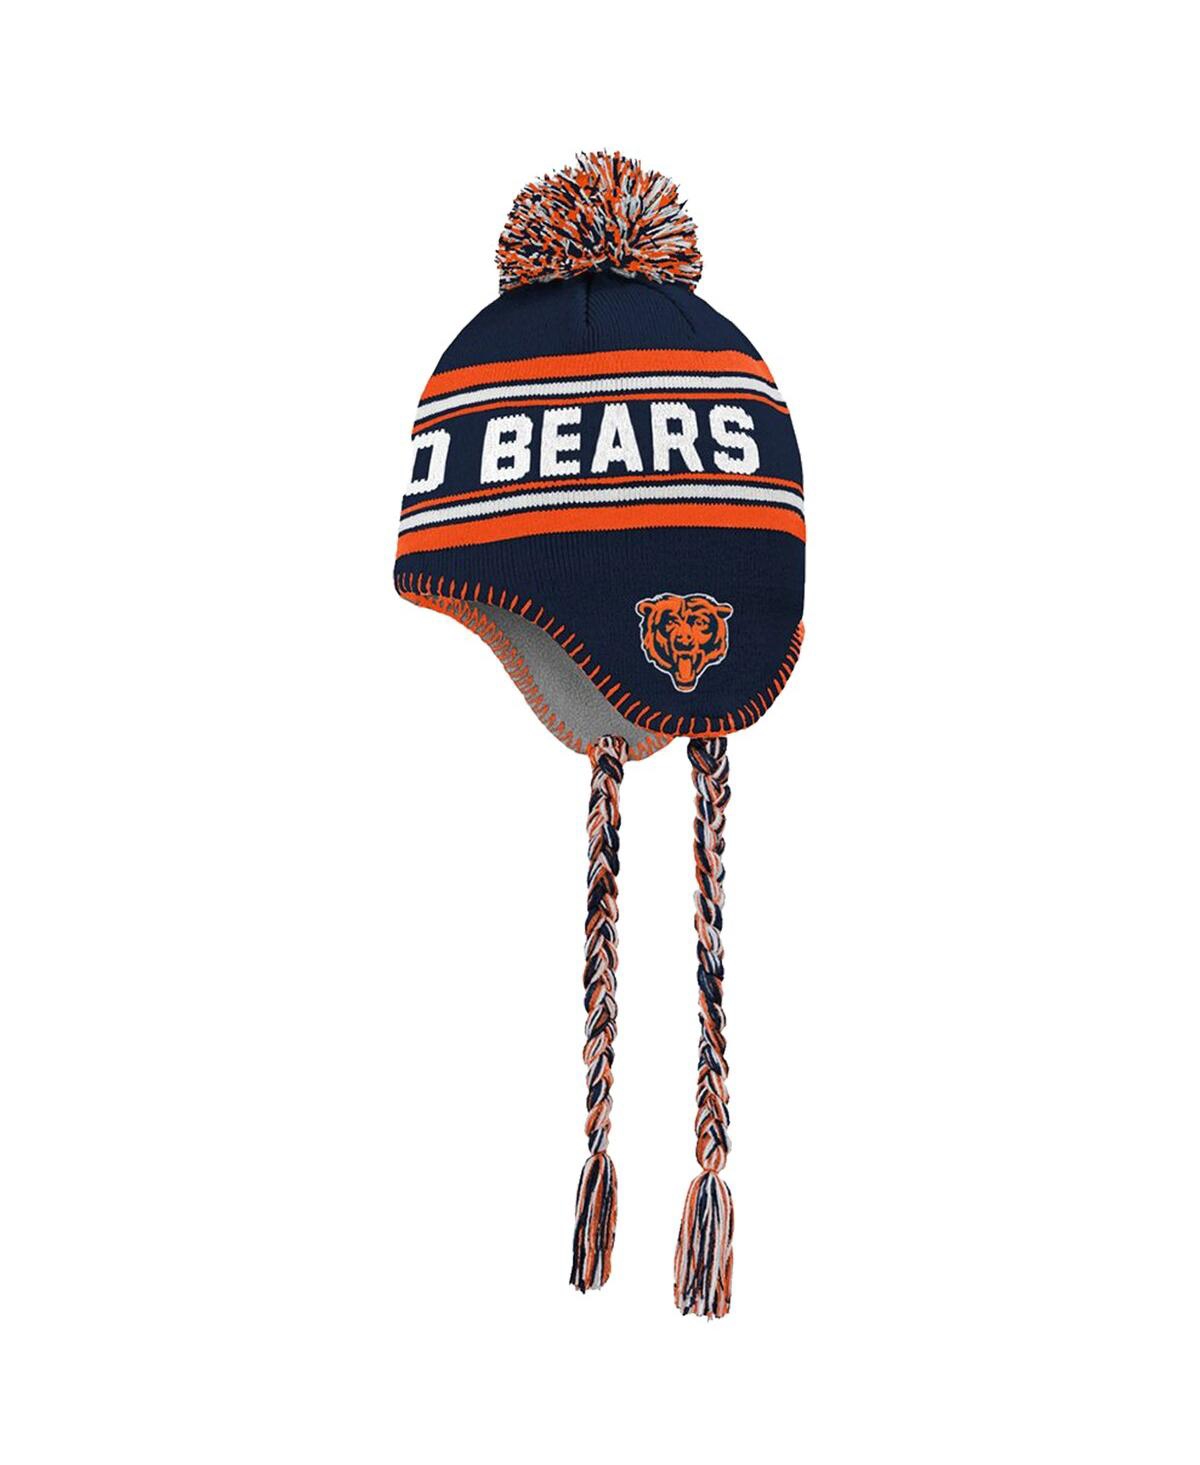 Outerstuff Babies' Preschool Boys And Girls Navy And Orange Chicago Bears Jacquard Tassel Knit Hat With Pom In Brown,orange